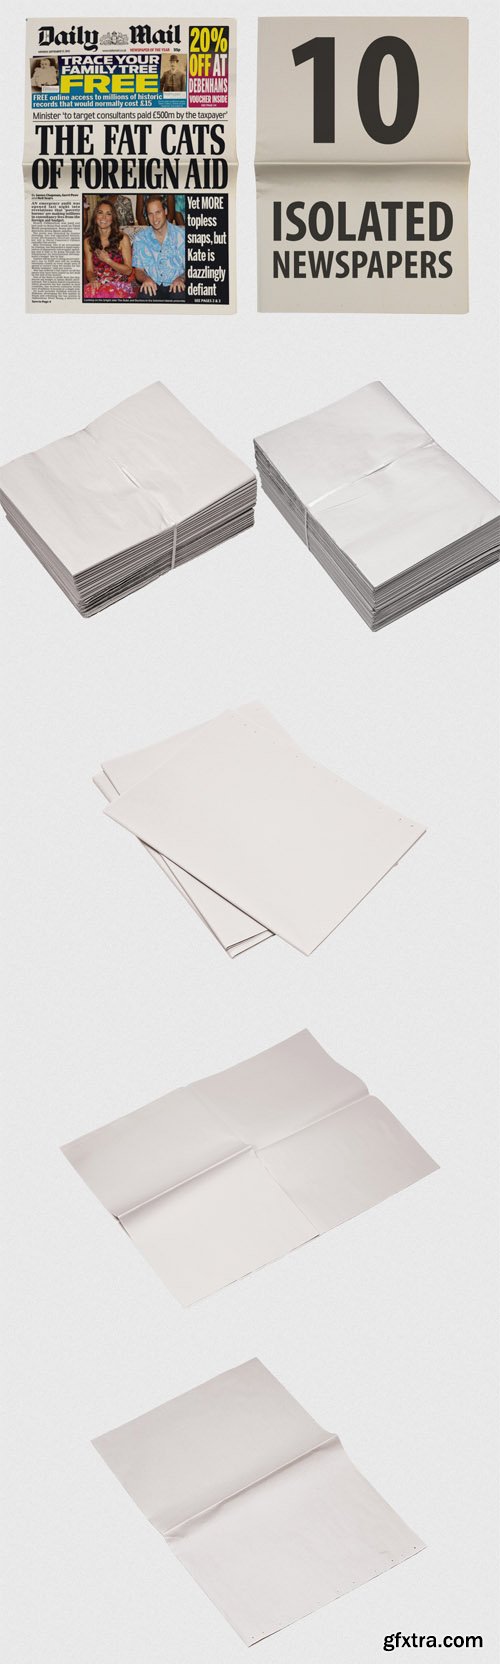 Newspaper Isolated Templates